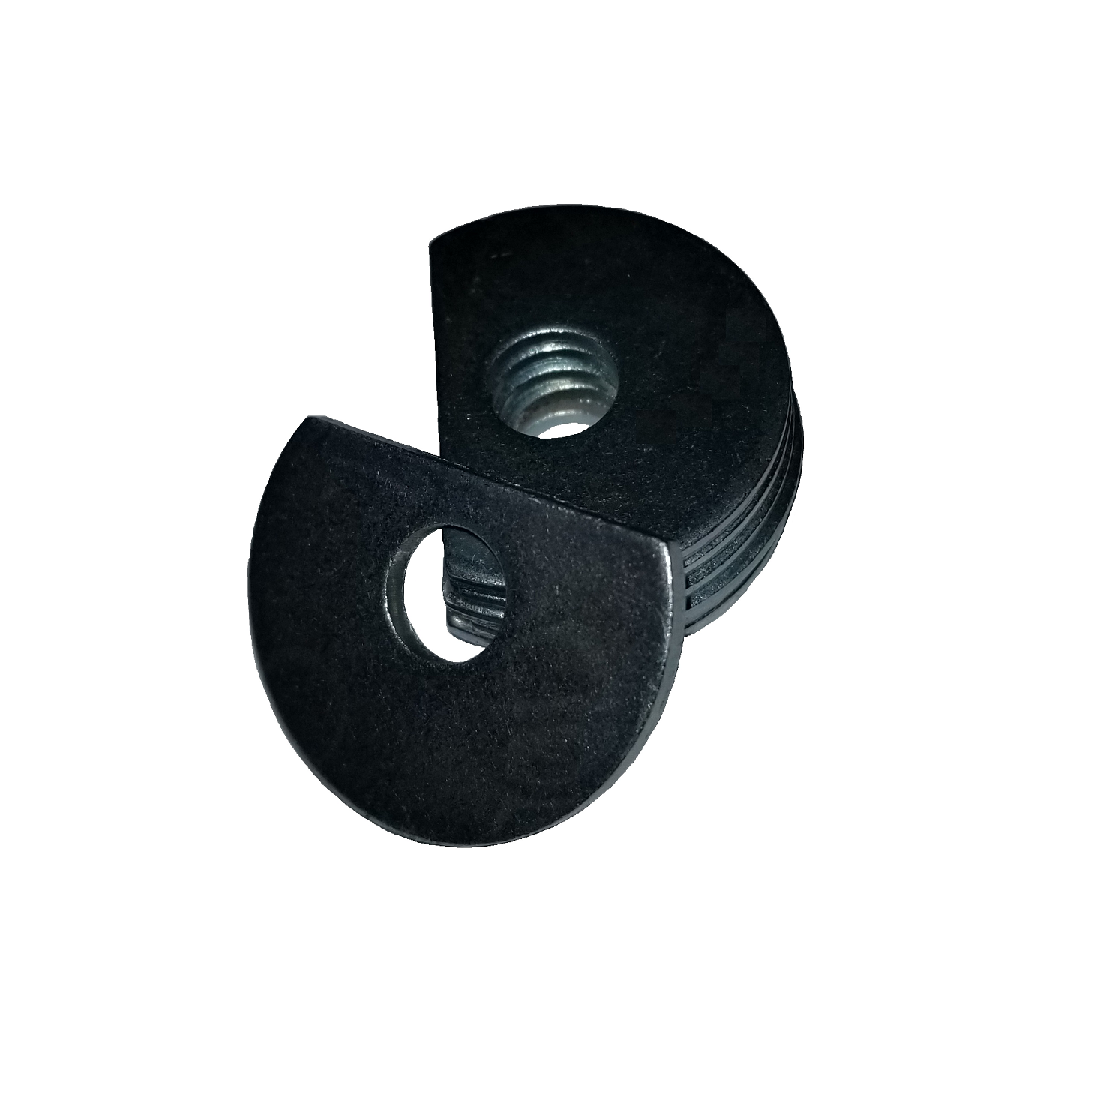 Clipped OD Washer - 2.020 ID, 3.000 OD, 0.134 Thick, Low Carbon Steel - Soft